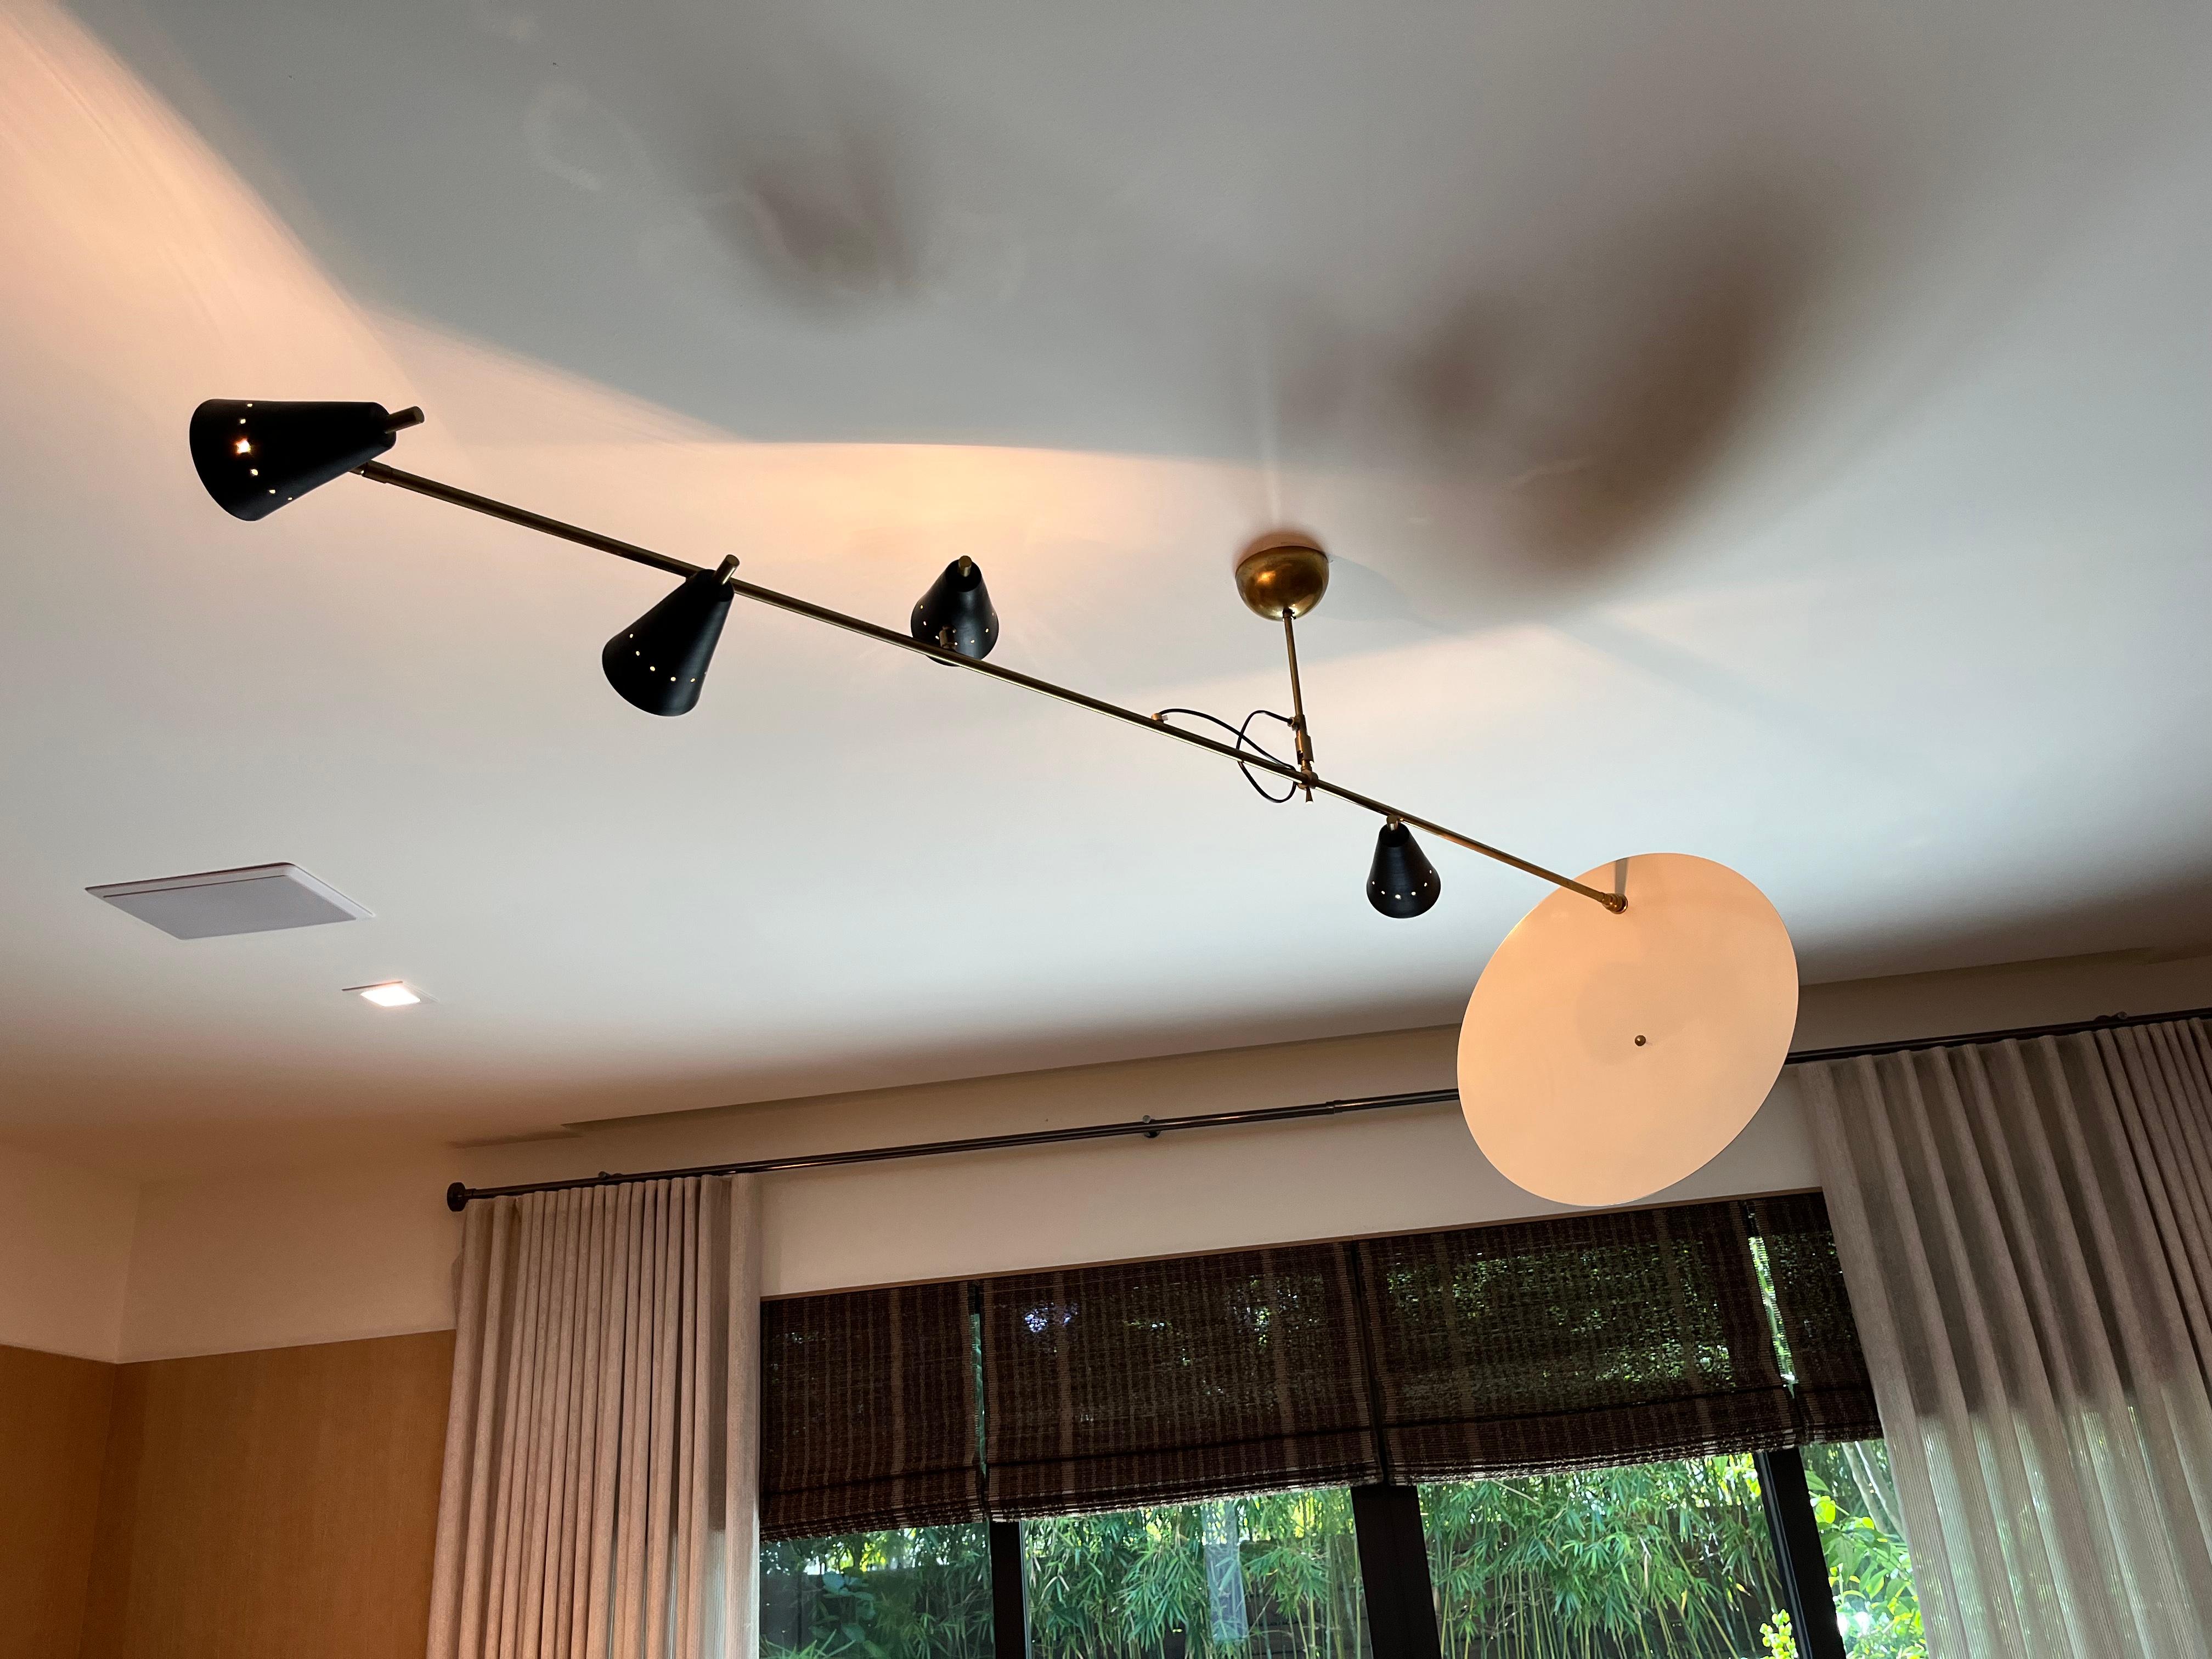 Sculptural ceiling light with multiple positions for light mobility. Each cone can be maneuvered as well as angled in the center of the hanging rod.